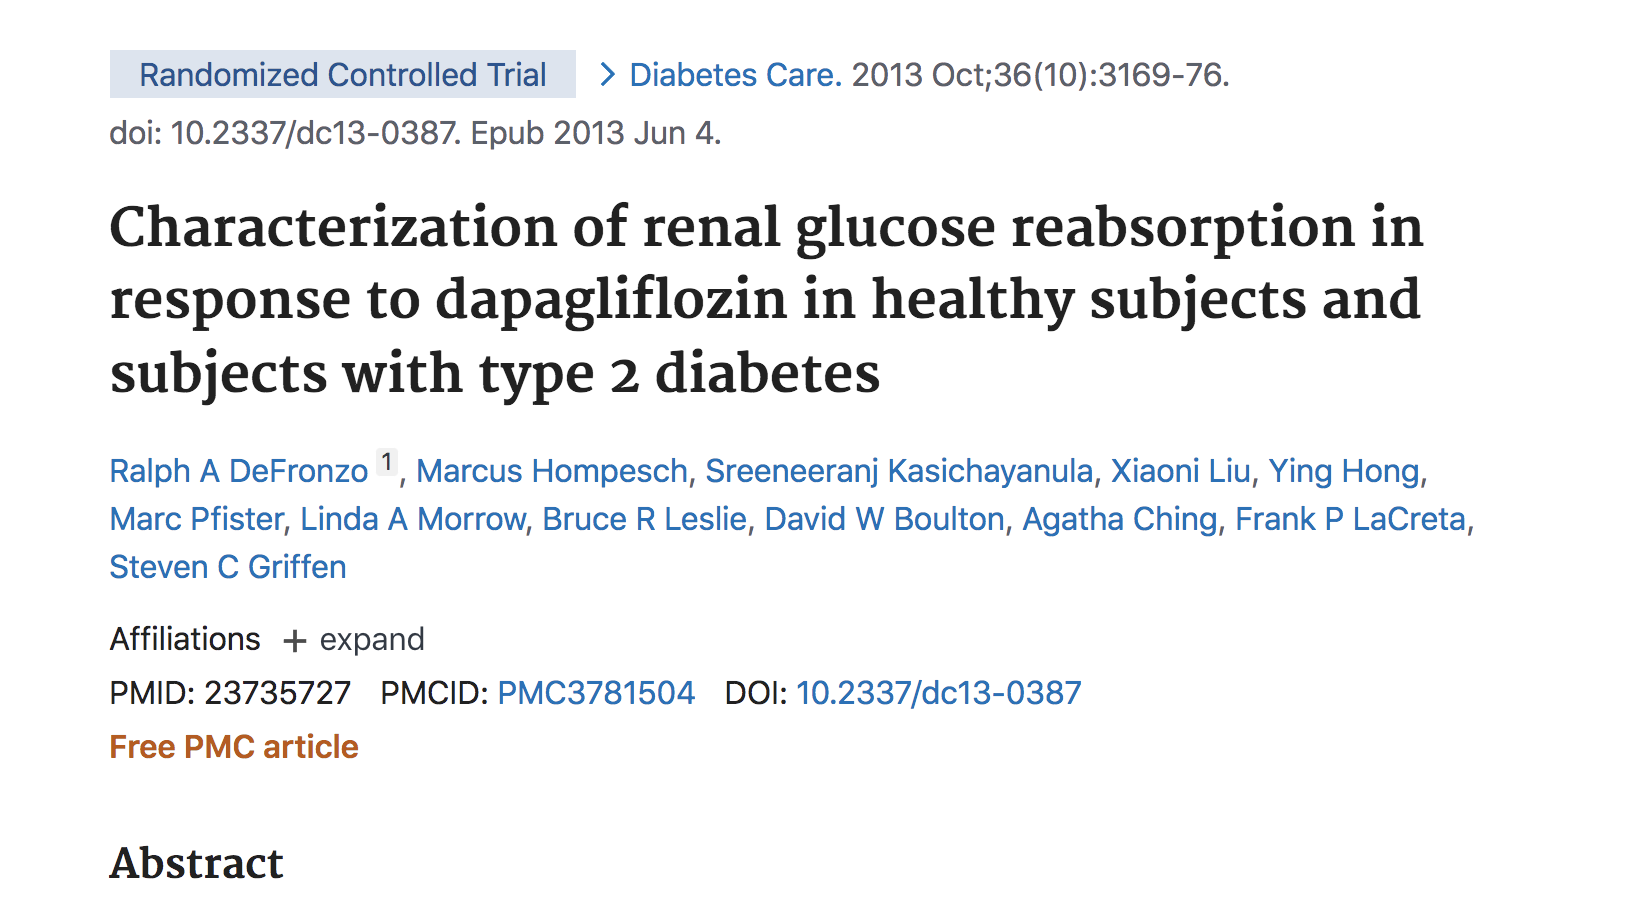 image of Characterization of renal glucose reabsorption in response to dapagliflozin in healthy subjects and subjects with type 2 diabetes.